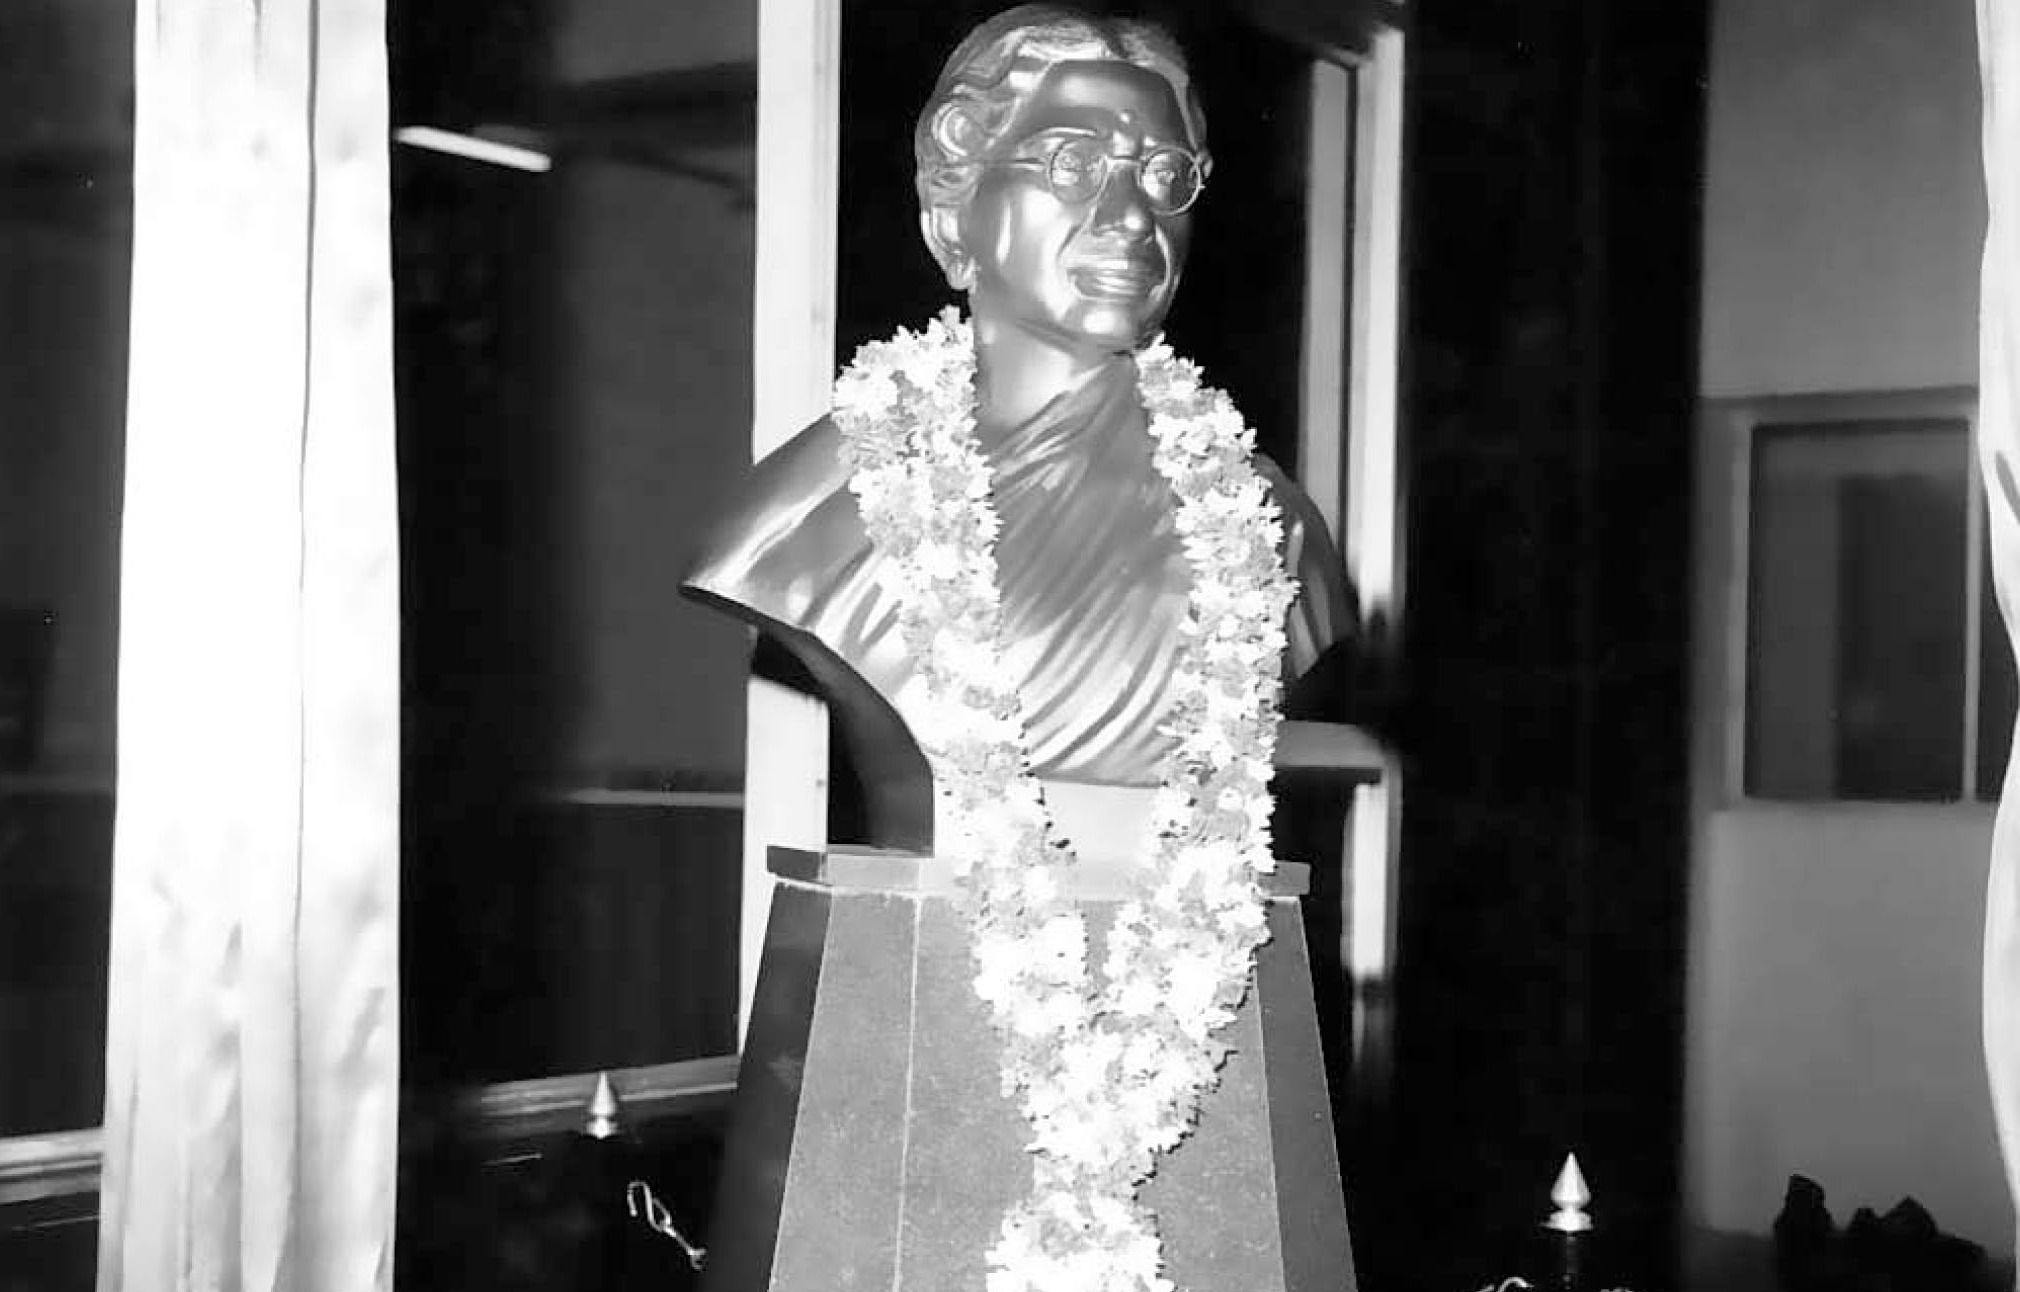 A bust of Dr Reddy at the Cancer Institute, Chennai 